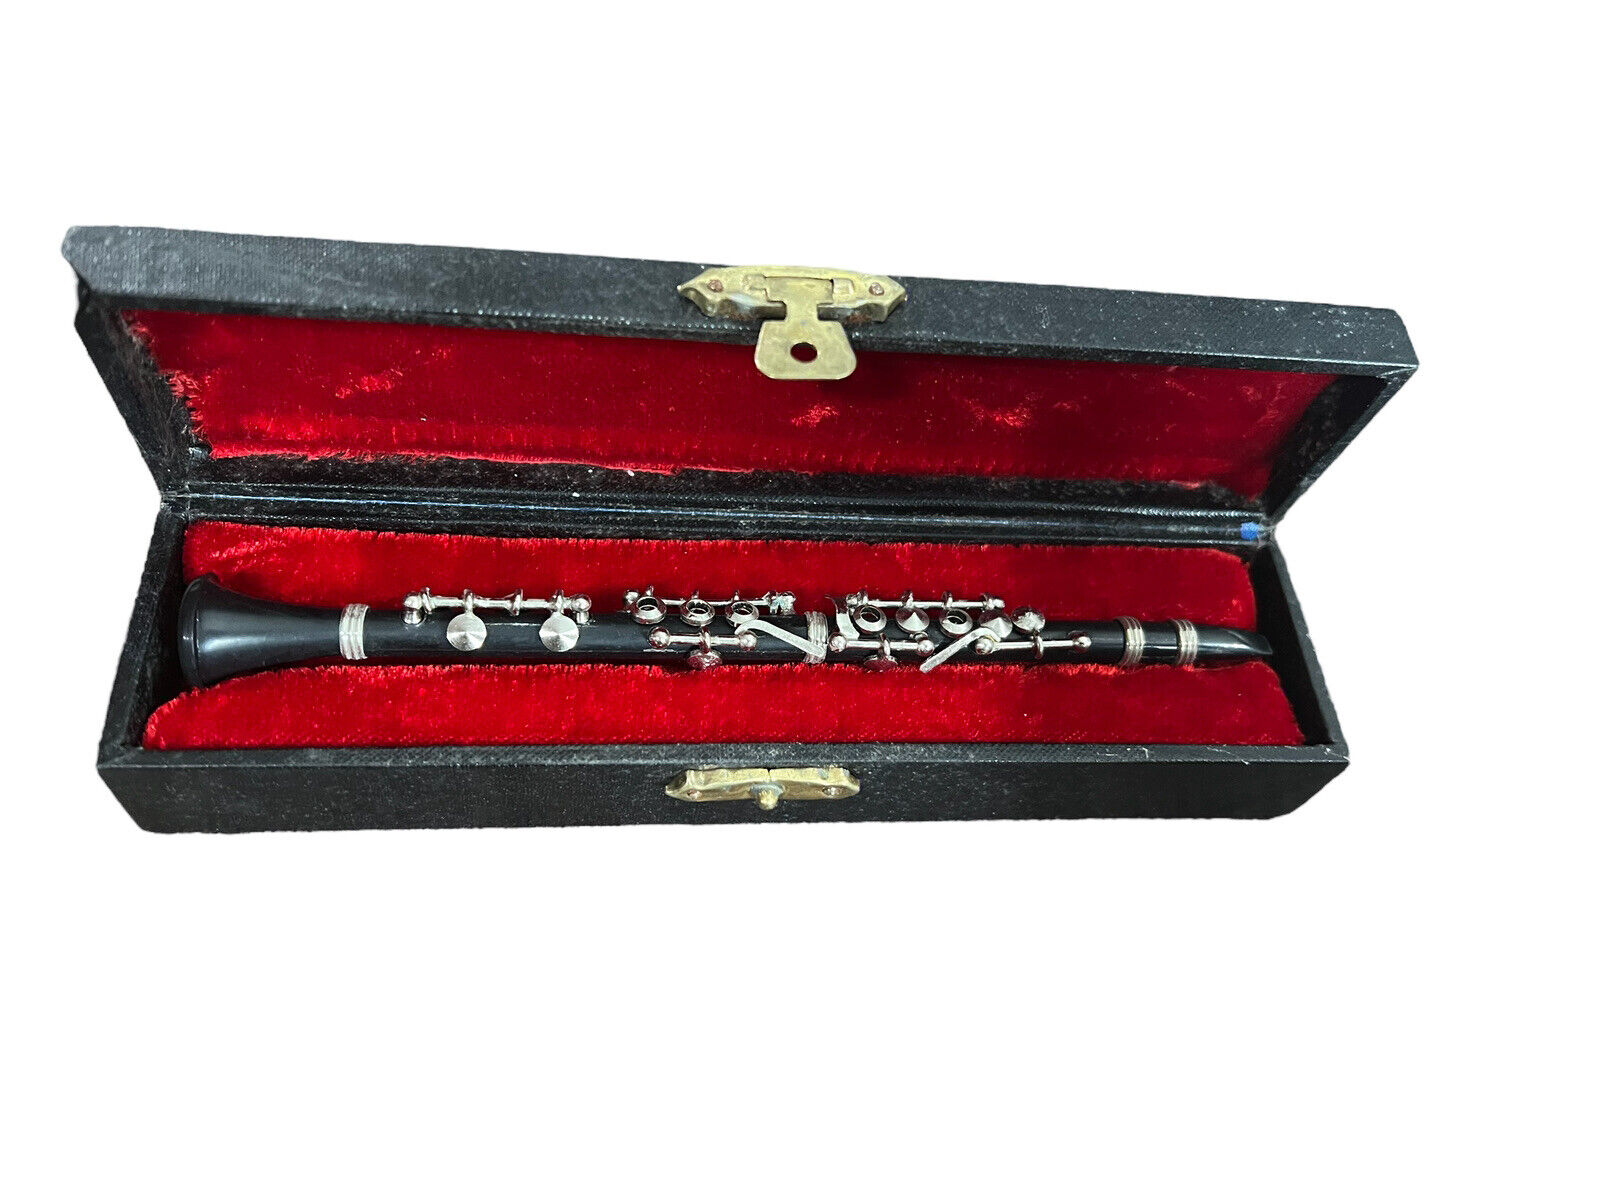 Clarinet Miniature Black Silver Tone Handmade Musical Instrument With Case